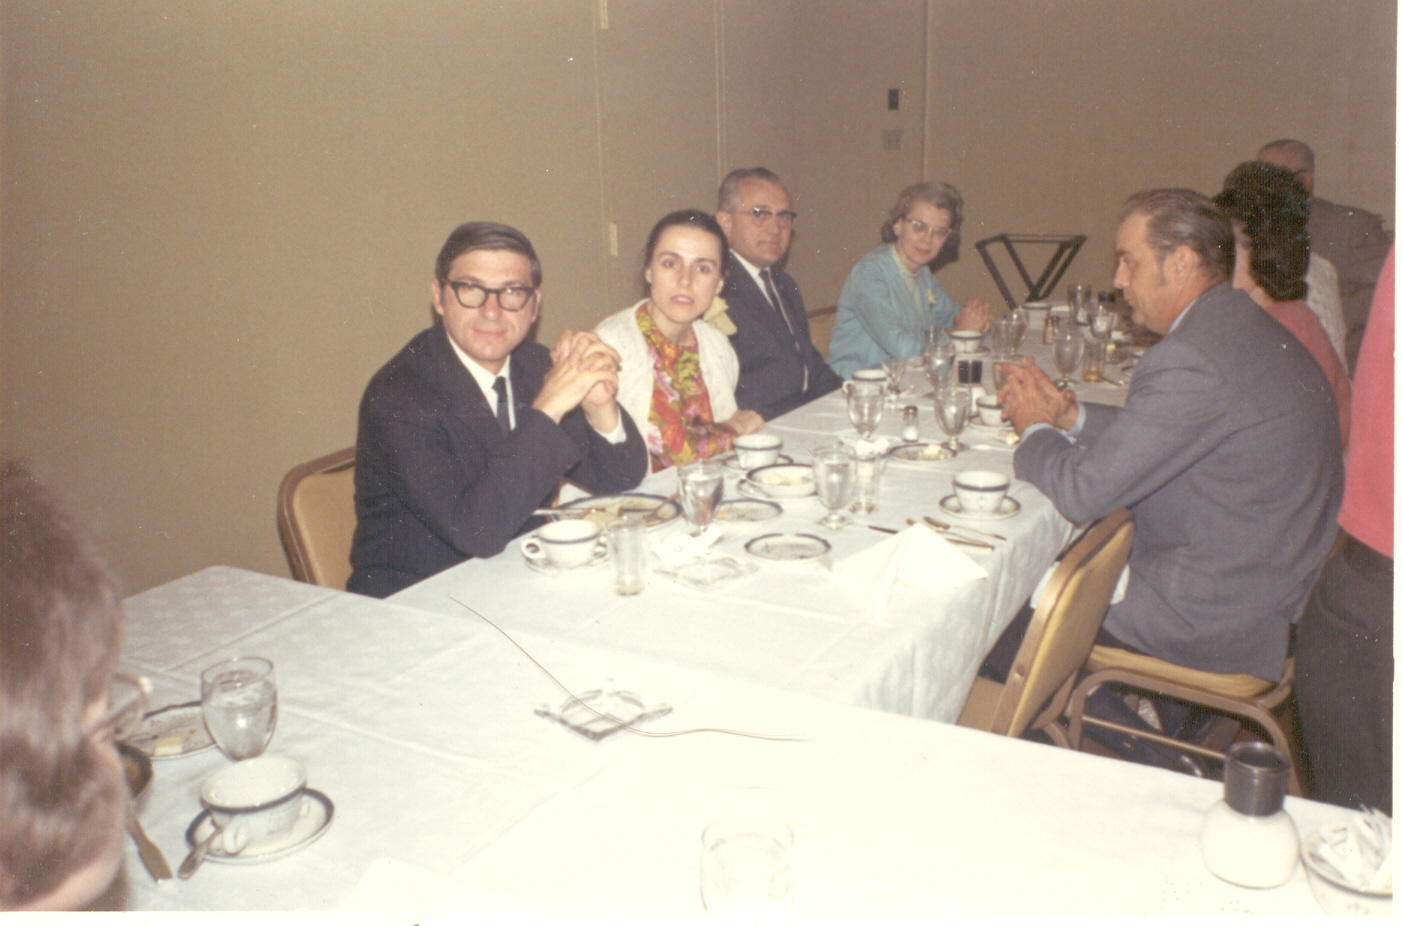 The Likoudis at a CUF dinner in the late 70